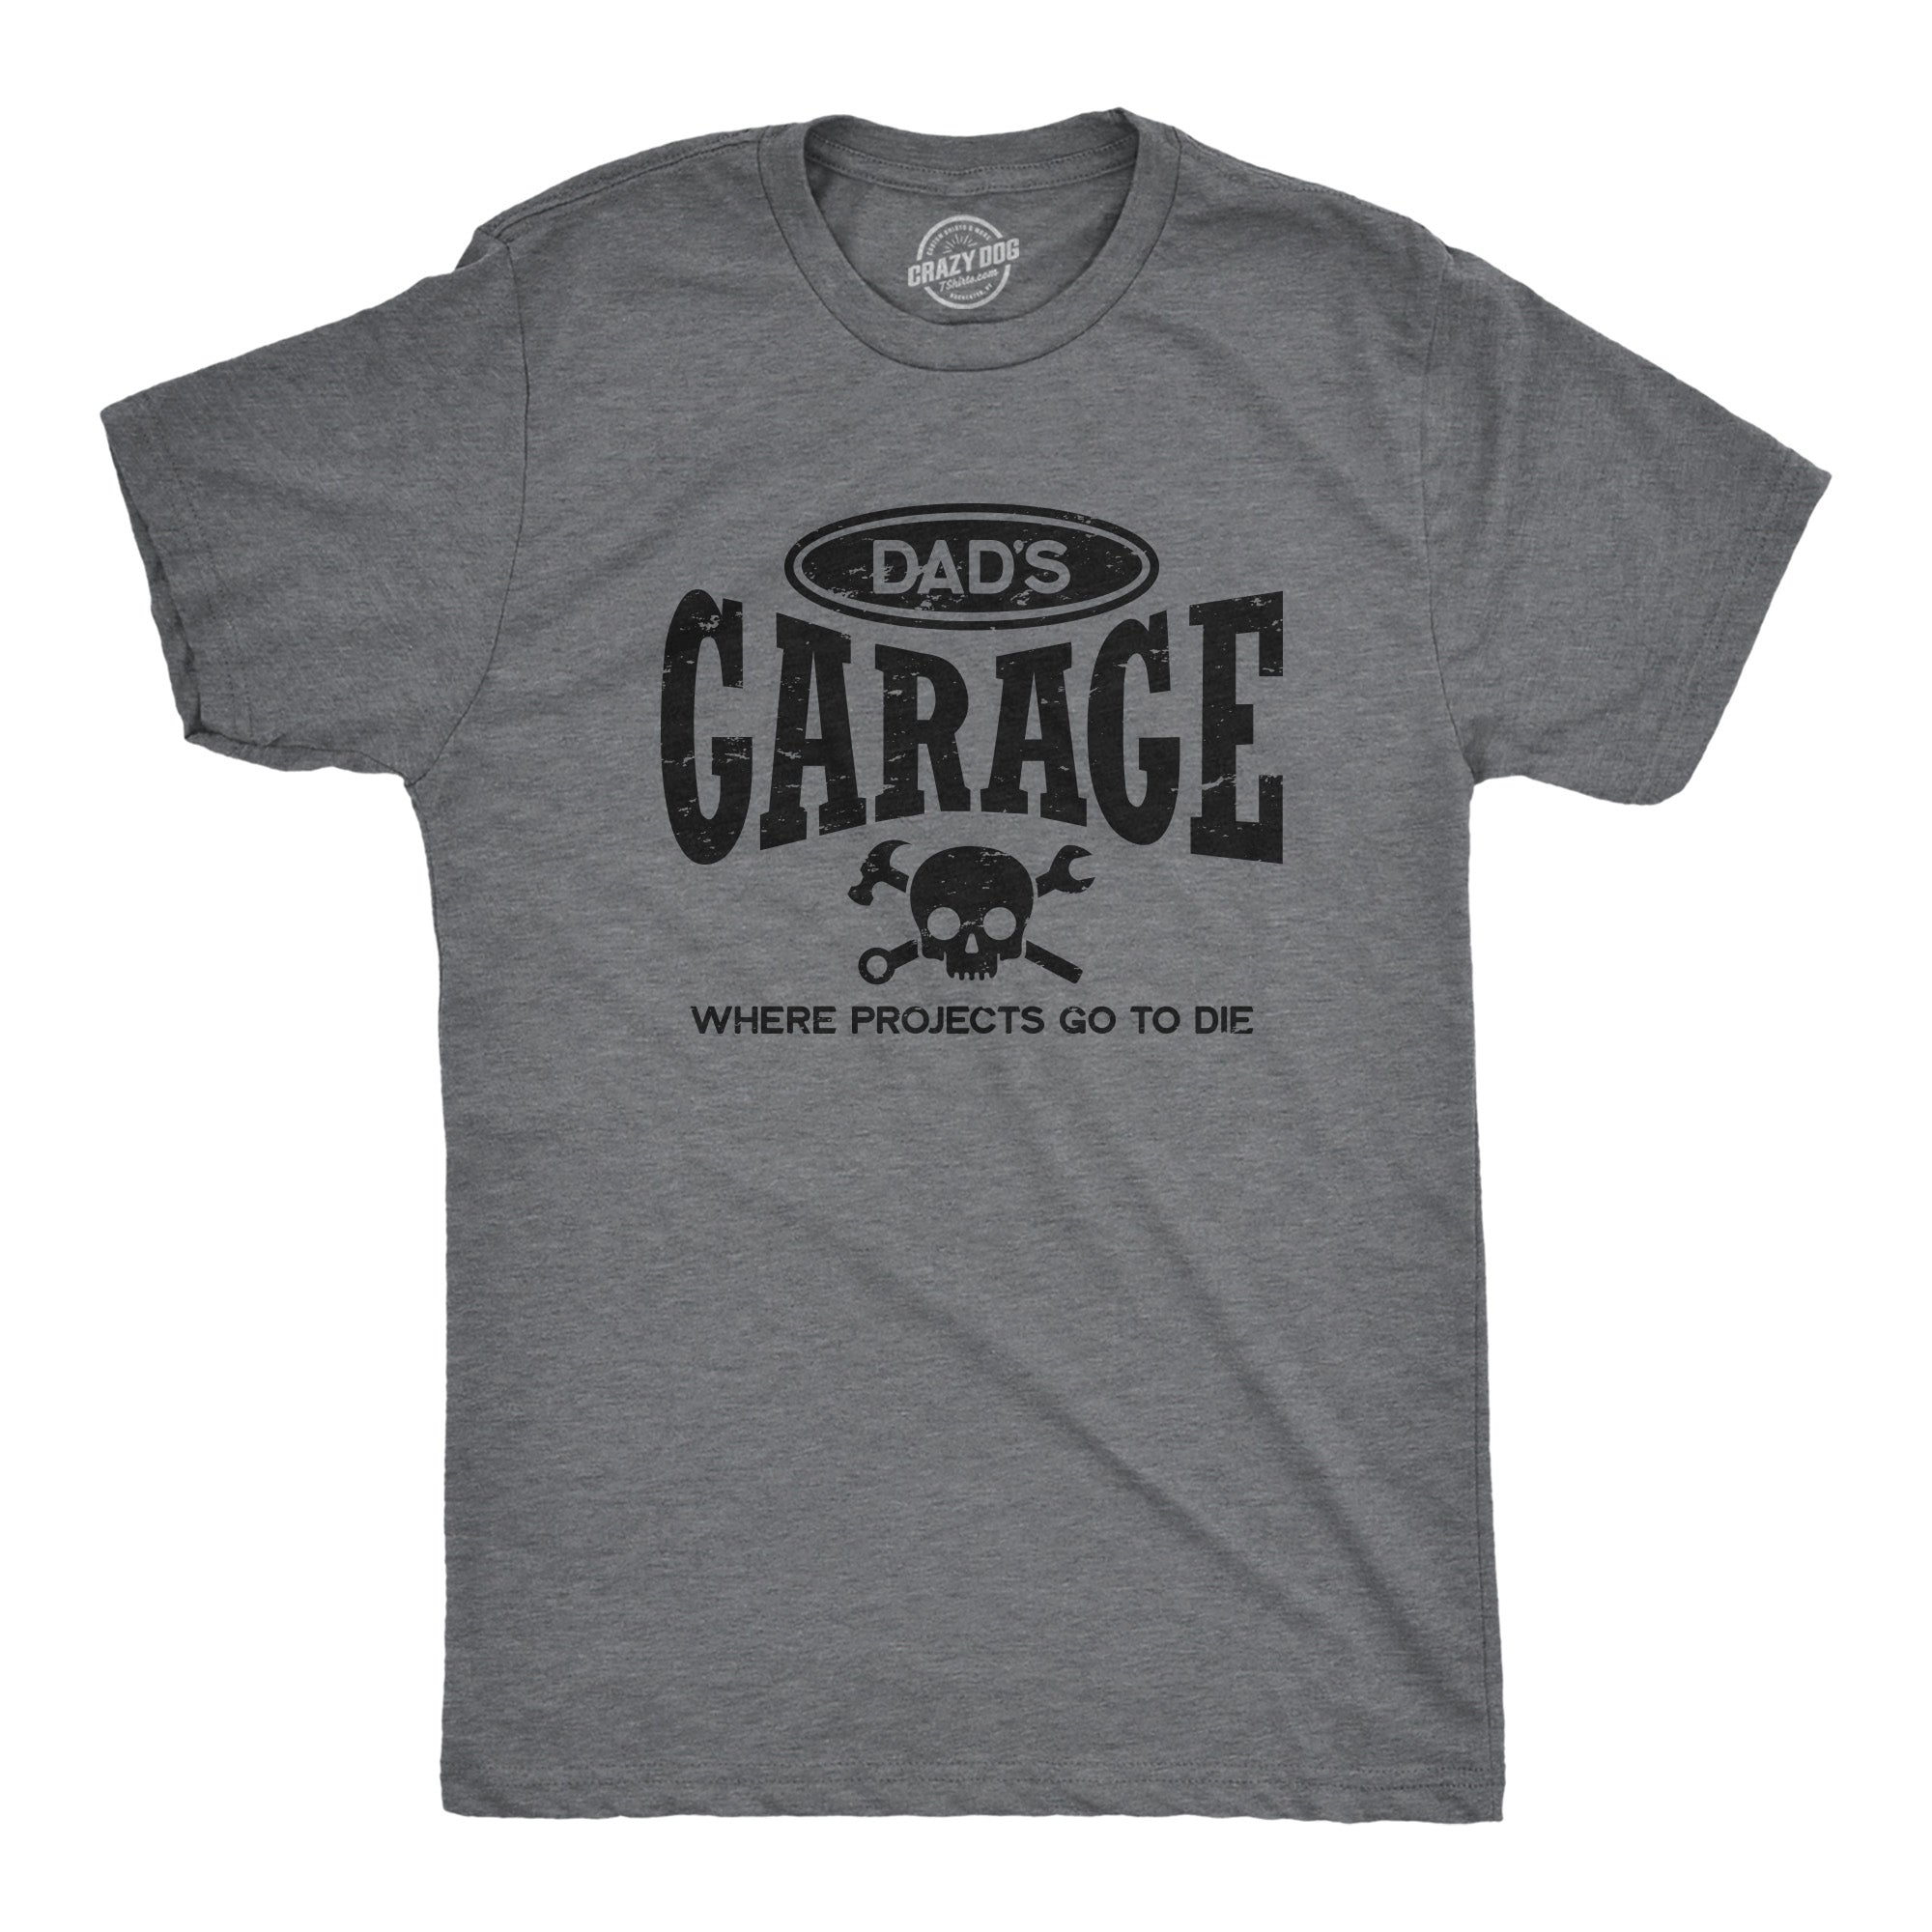 Funny Dark Heather Grey - GARAGE Dads Garage Where Projects Go To Die Mens T Shirt Nerdy Father's Day Sarcastic Tee